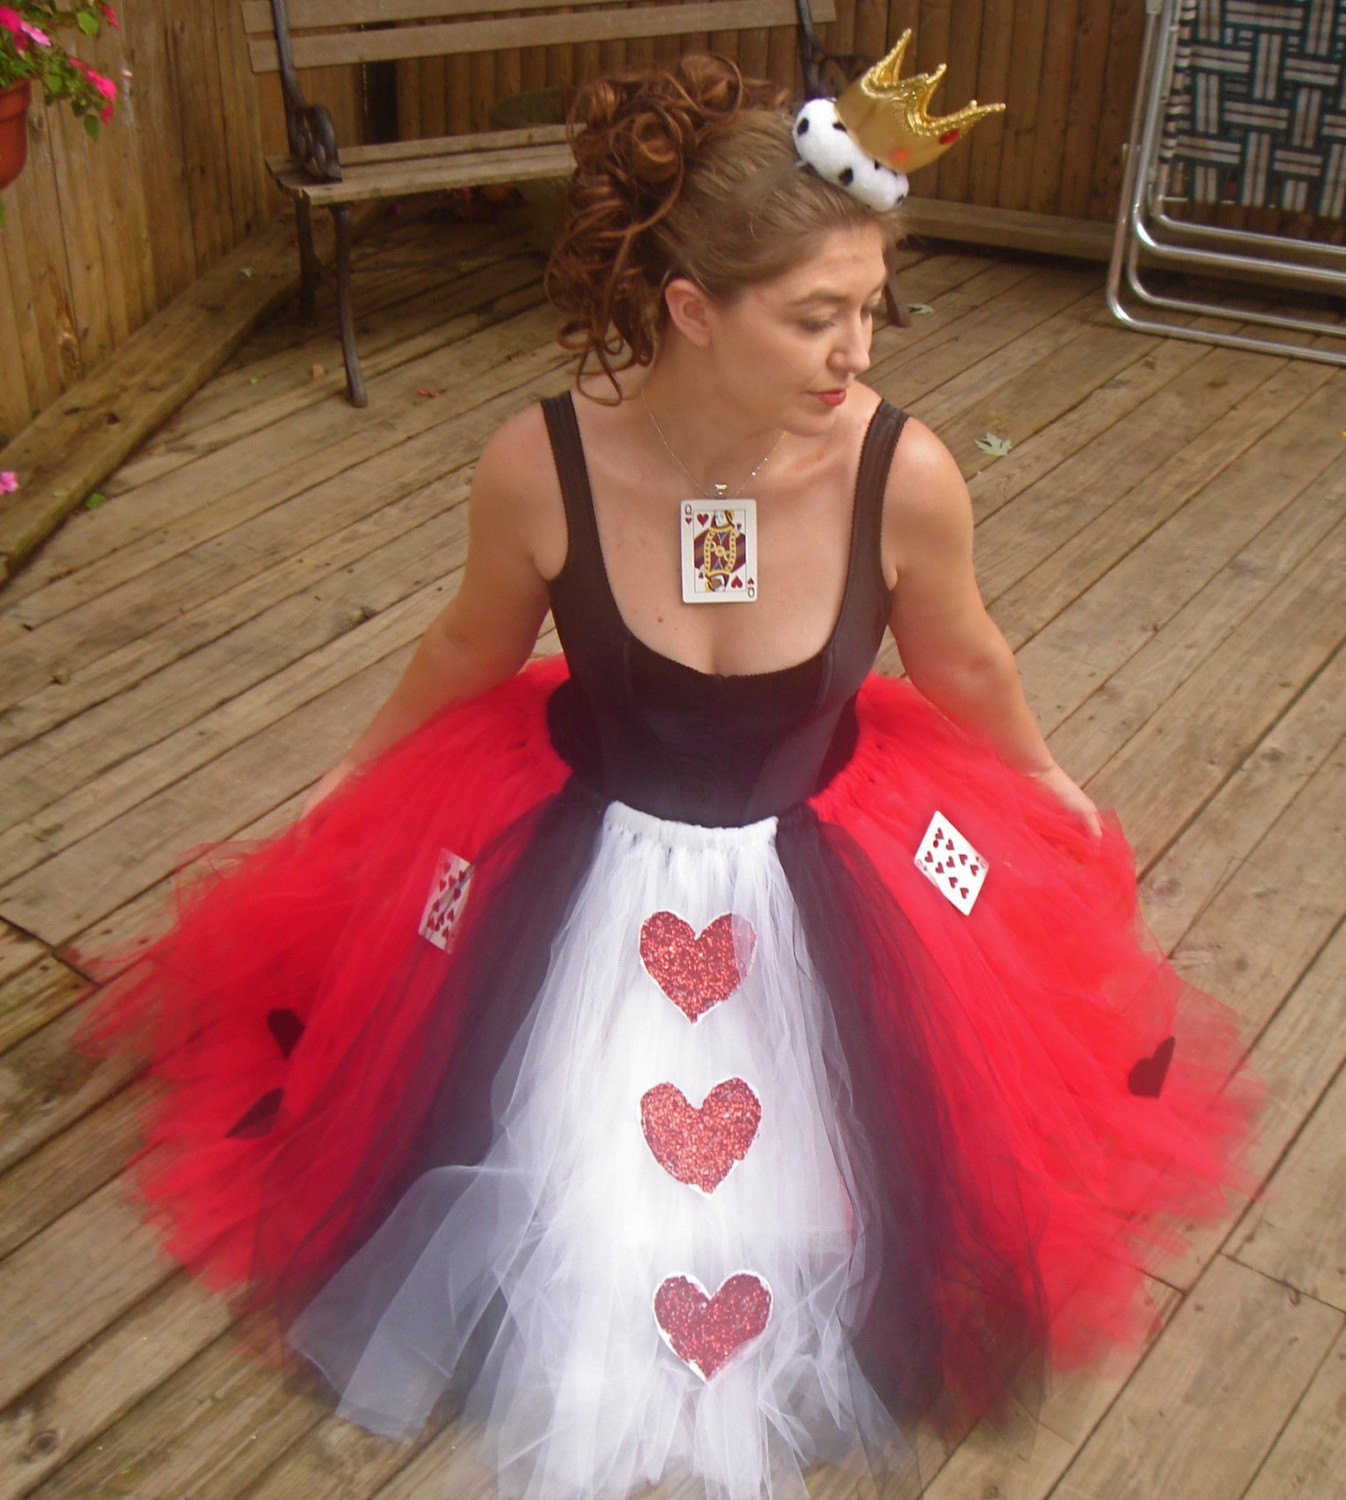 DIY Adult Halloween Costumes Ideas
 Queen of Hearts Adult Boutique Tutu Skirt Costume